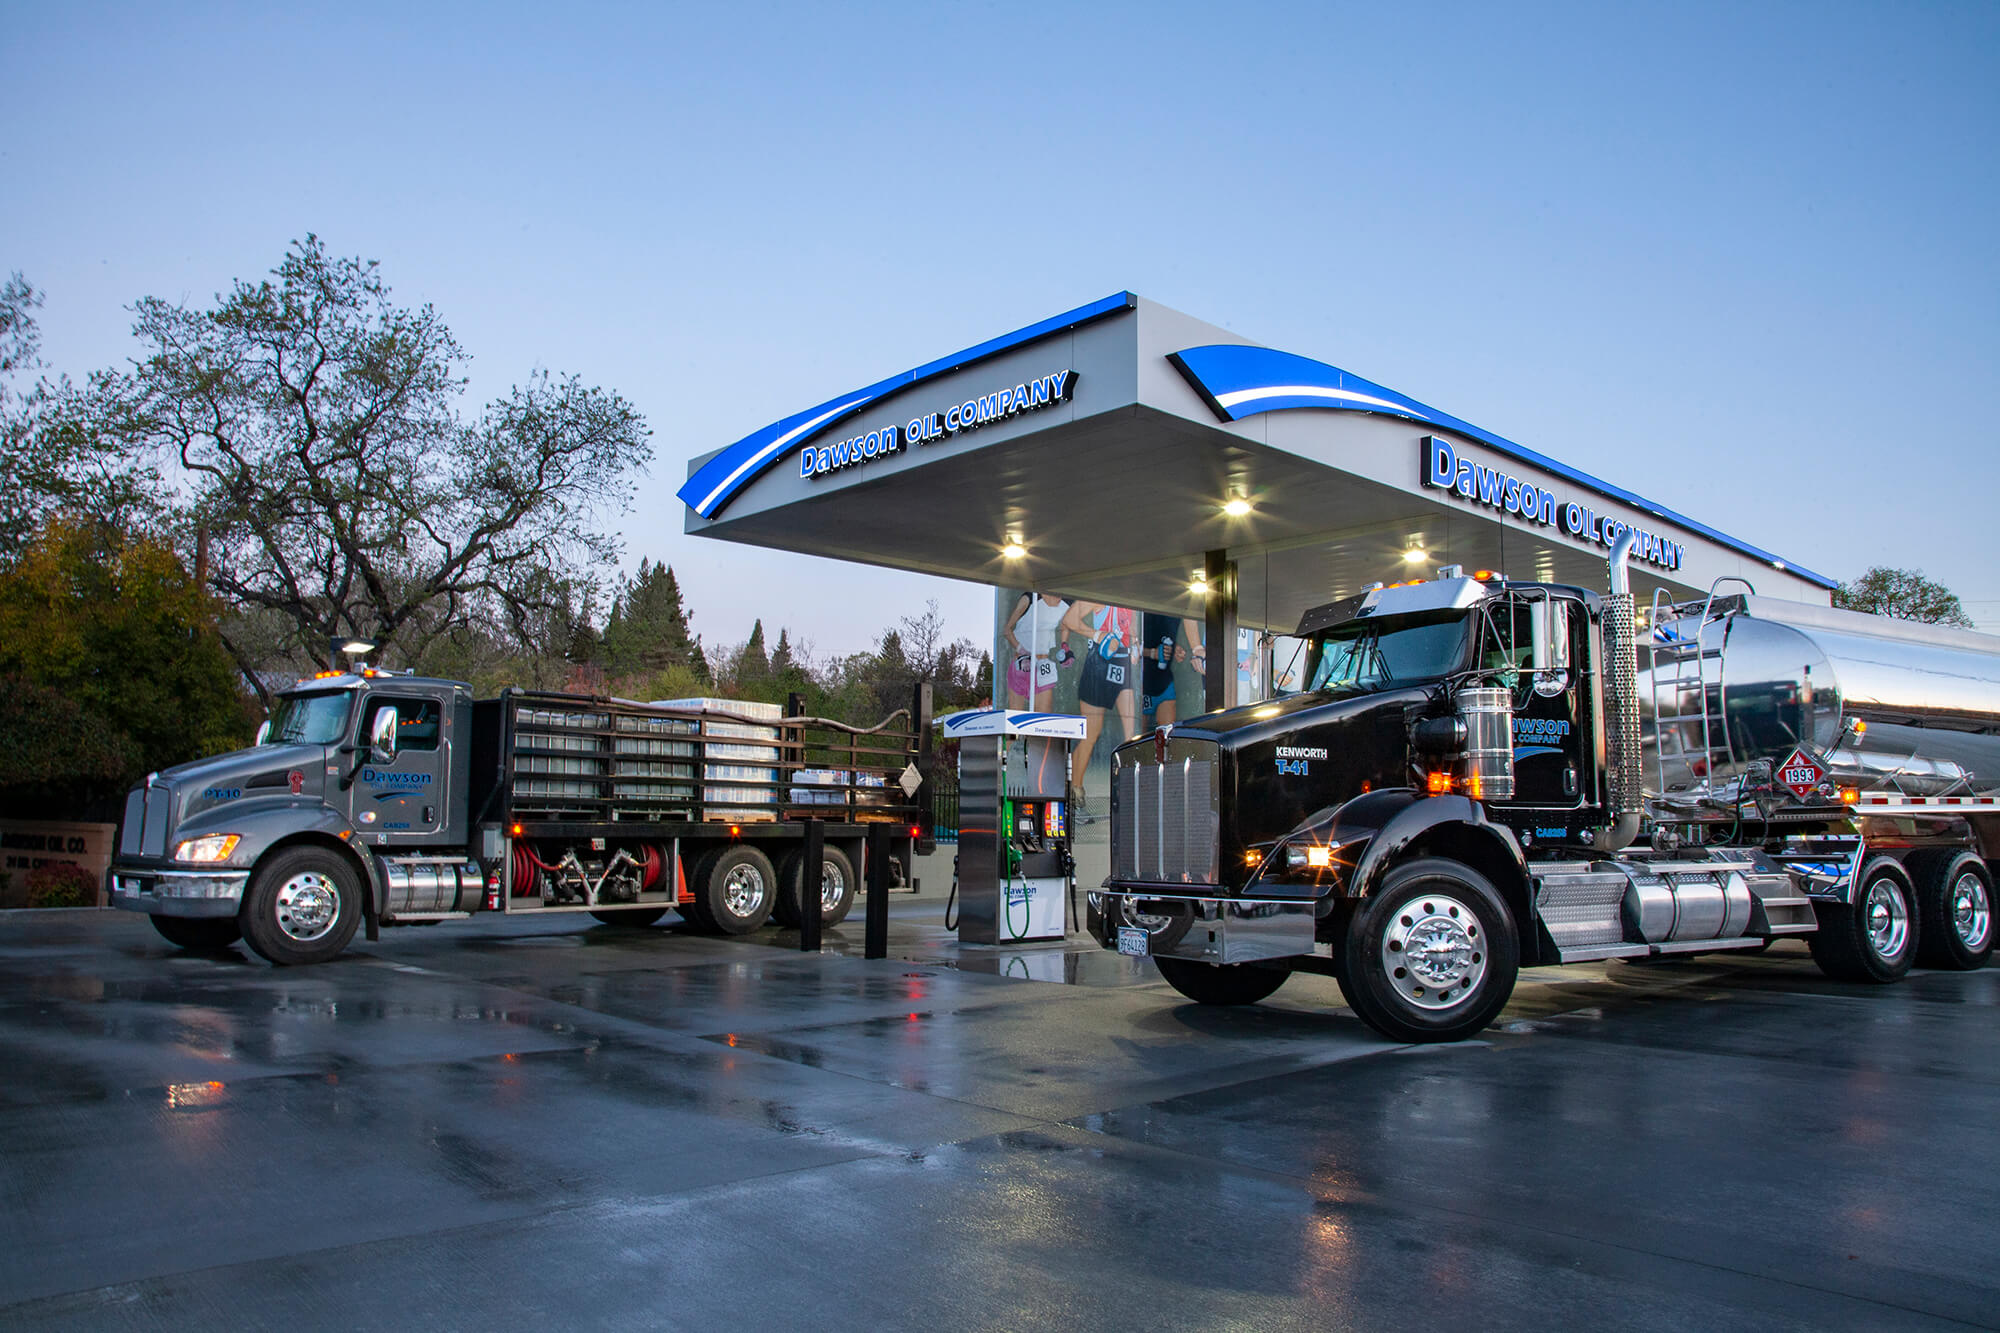 Serving Rocklin, Auburn, Diamond Springs, Yuba City, and Oroville. Our stations were built with you in mind – large turnaround areas, clean, and safe.